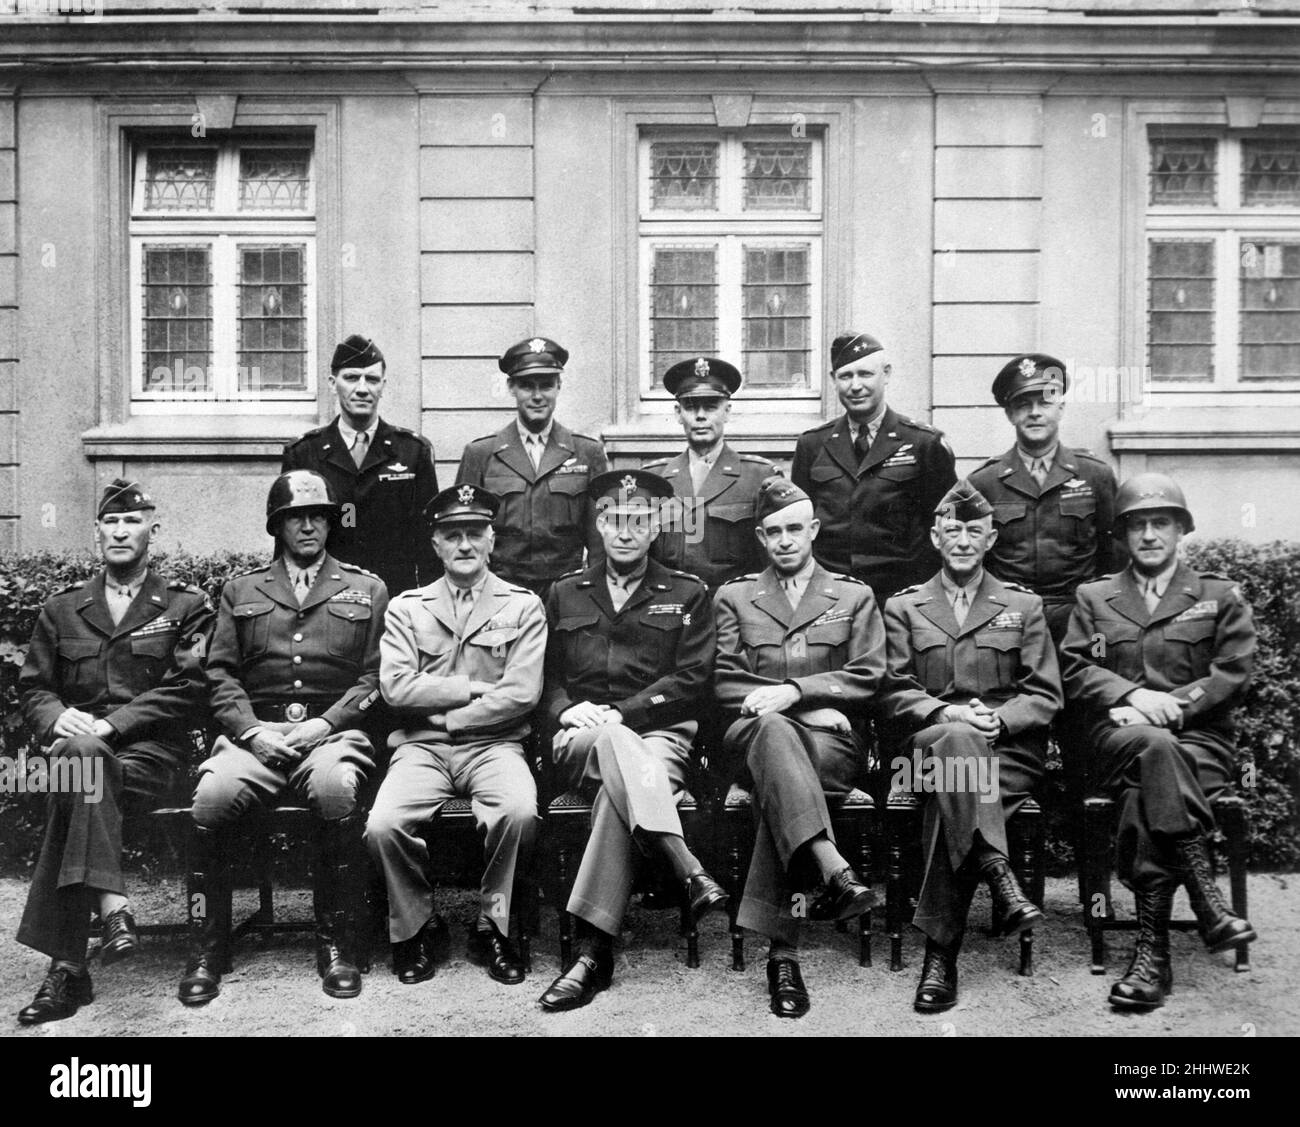 Senior American commanders of the European theater of World War II. Seated are (from left to right) Gens. William H. Simpson, George S. Patton, Carl A. Spaatz, Dwight D. Eisenhower, Omar Bradley, Courtney H. Hodges, and Leonard T. Gerow; standing are (from left to right) Gens. Ralph F. Stearley, Hoyt Vandenberg, Walter Bedell Smith, Otto P. Weyland, and Richard E. Nugent. Stock Photo